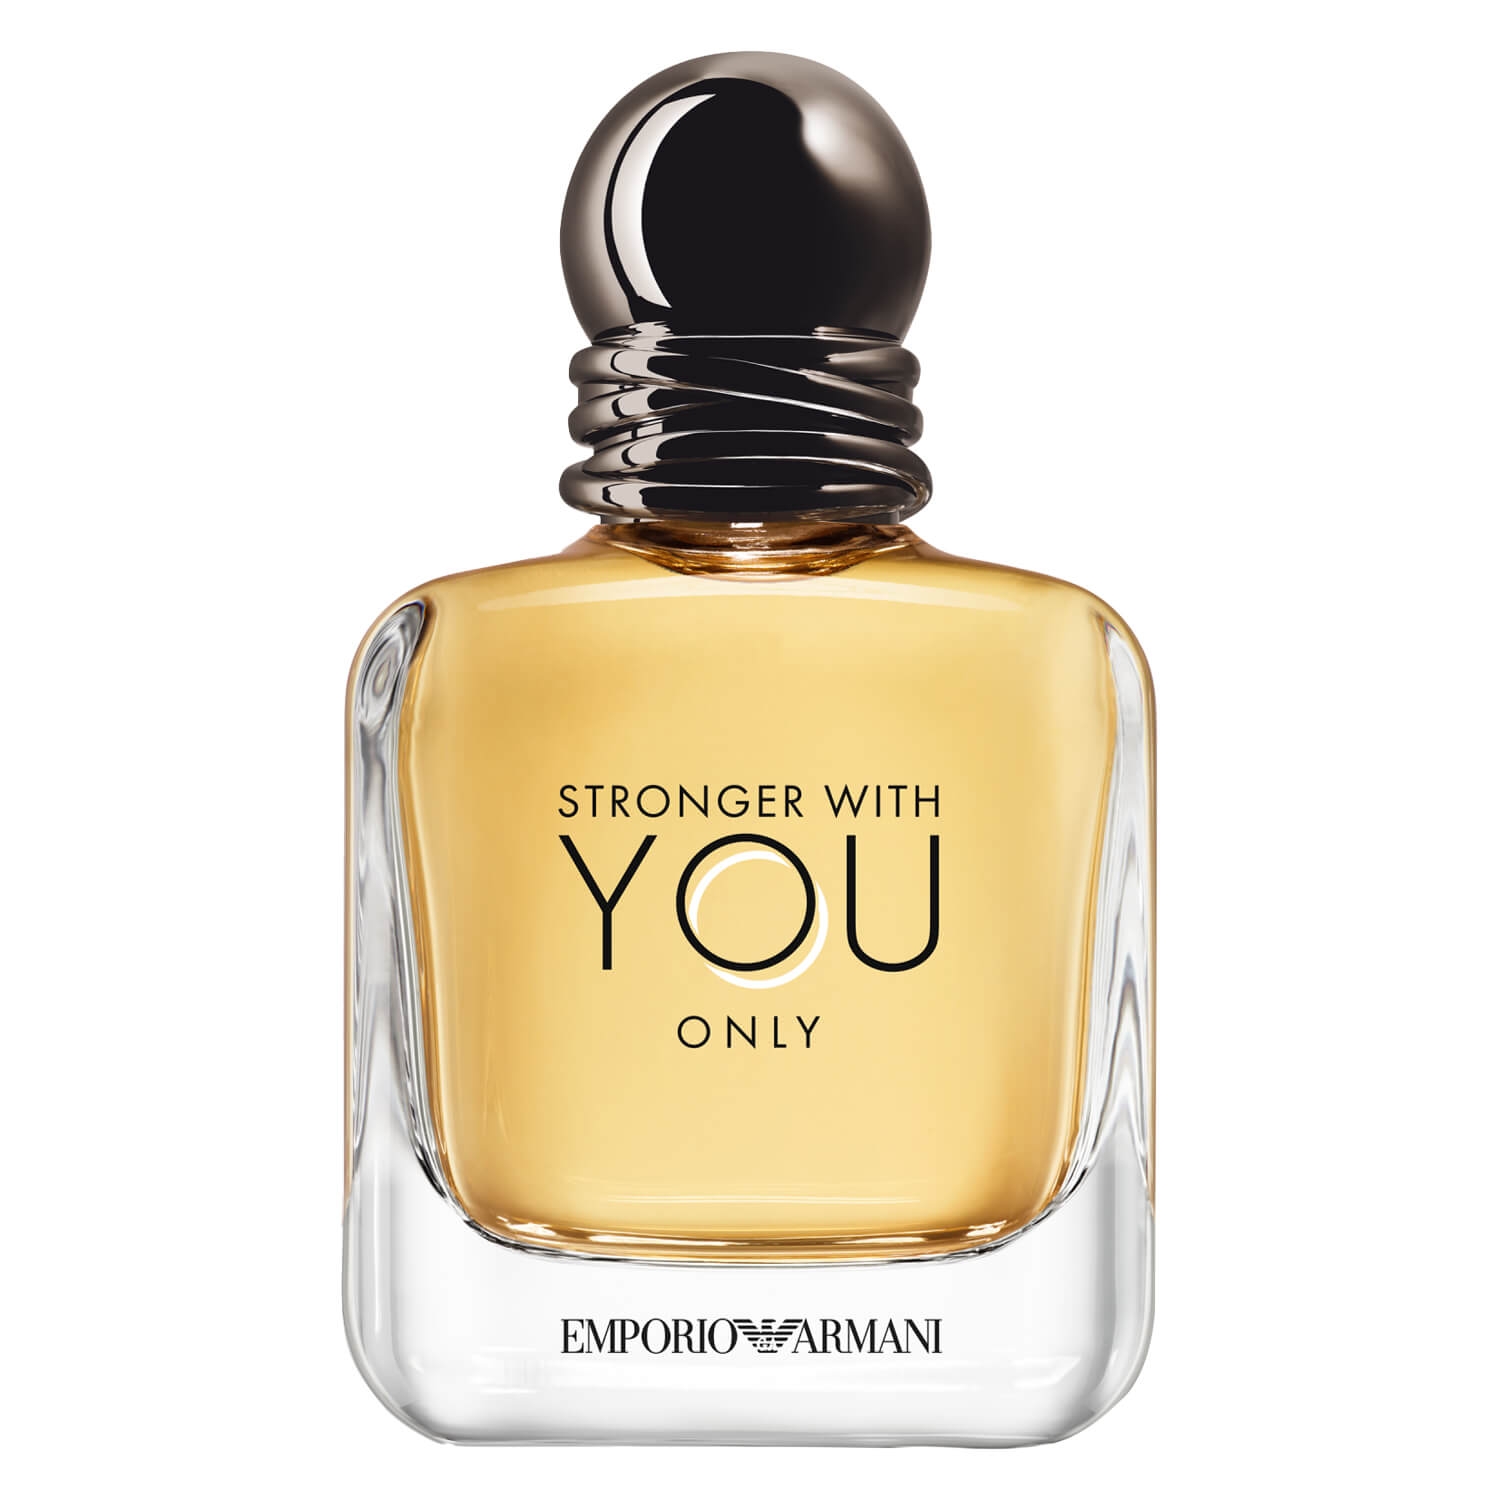 Product image from Emporio Armani - Stronger With You Only Eau de Toilette